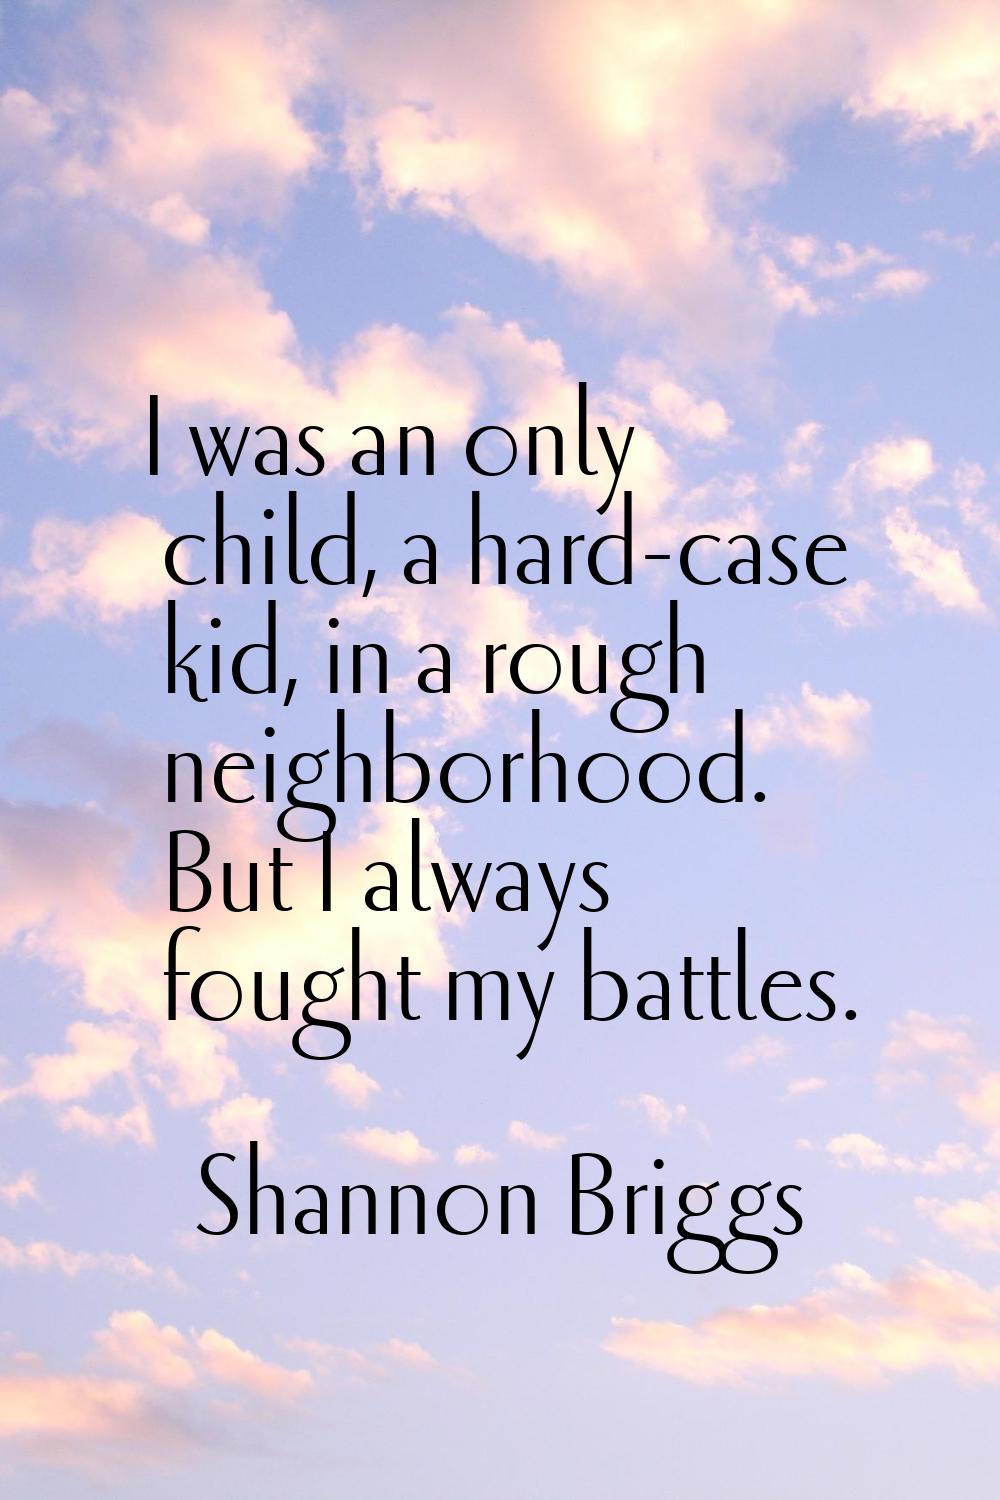 I was an only child, a hard-case kid, in a rough neighborhood. But I always fought my battles.